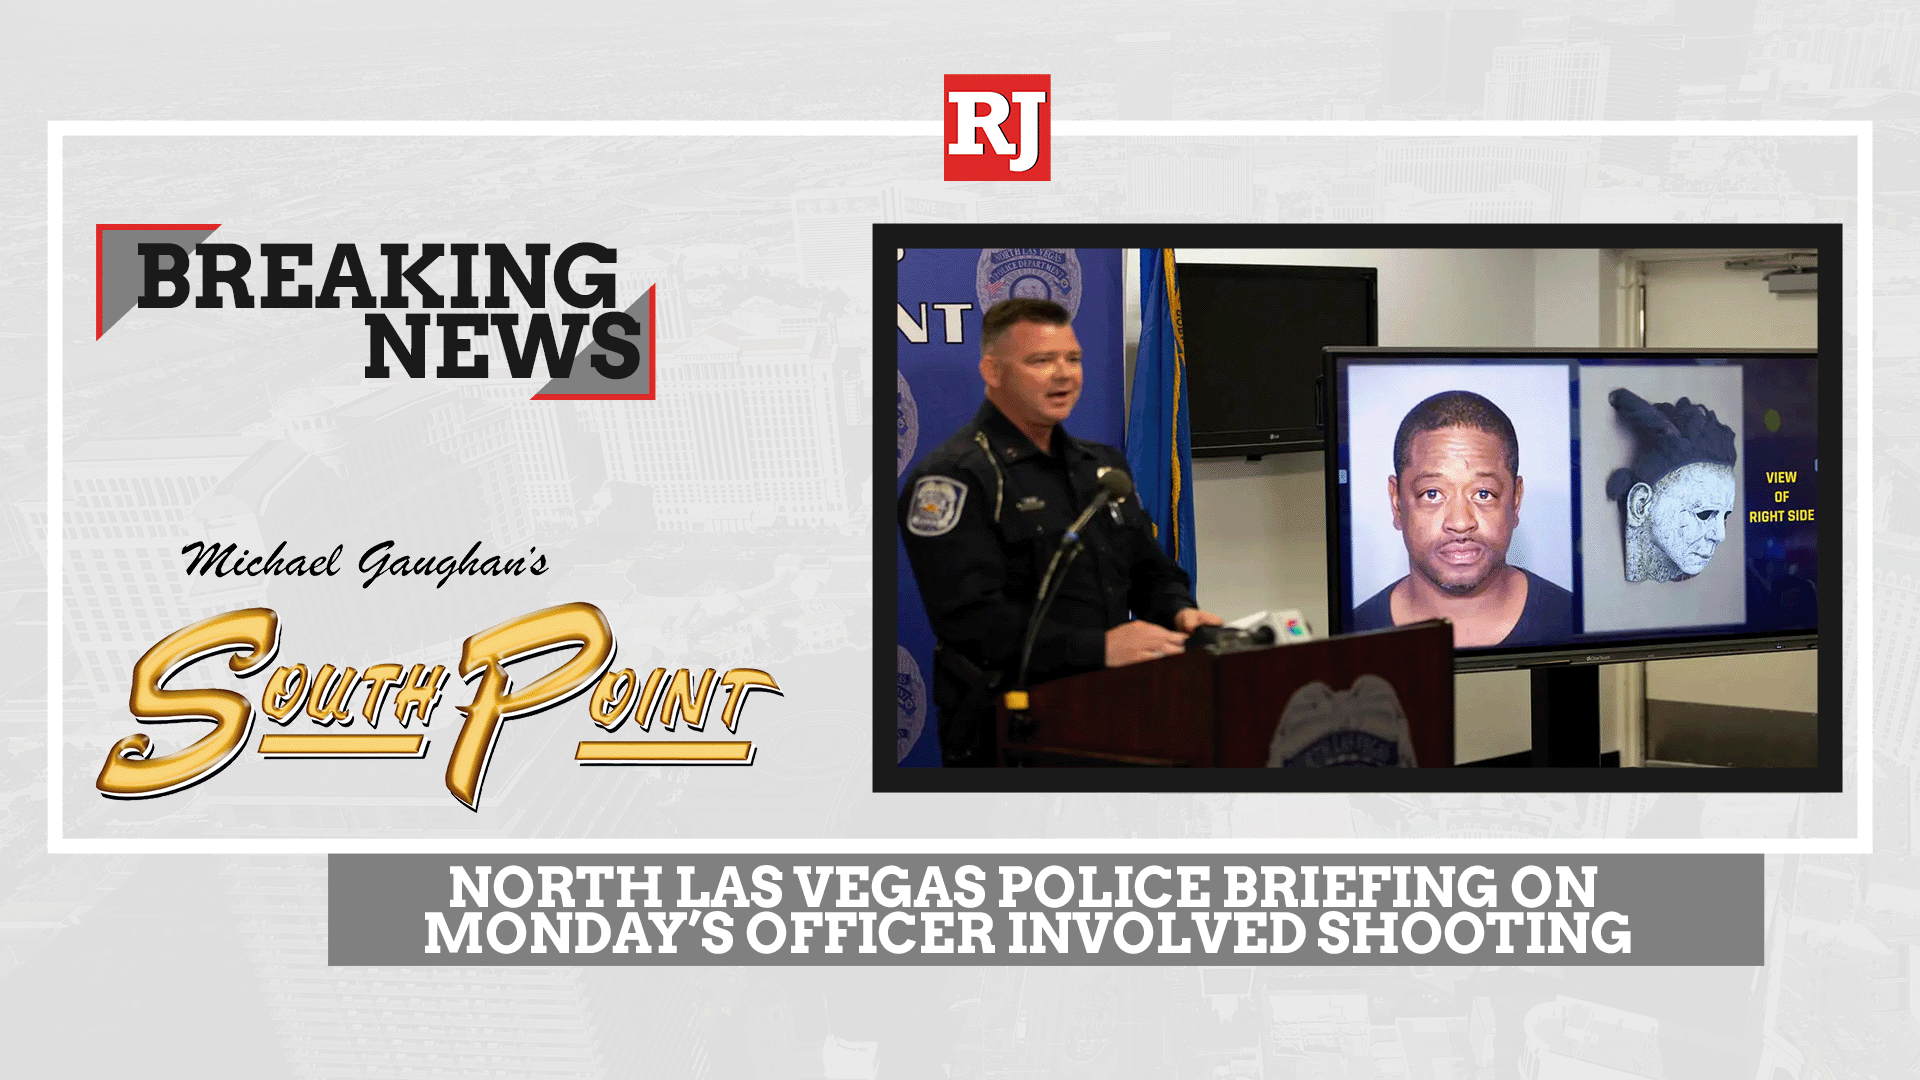 North Las Vegas Police Briefing On Monday’s Officer Involved Shooting